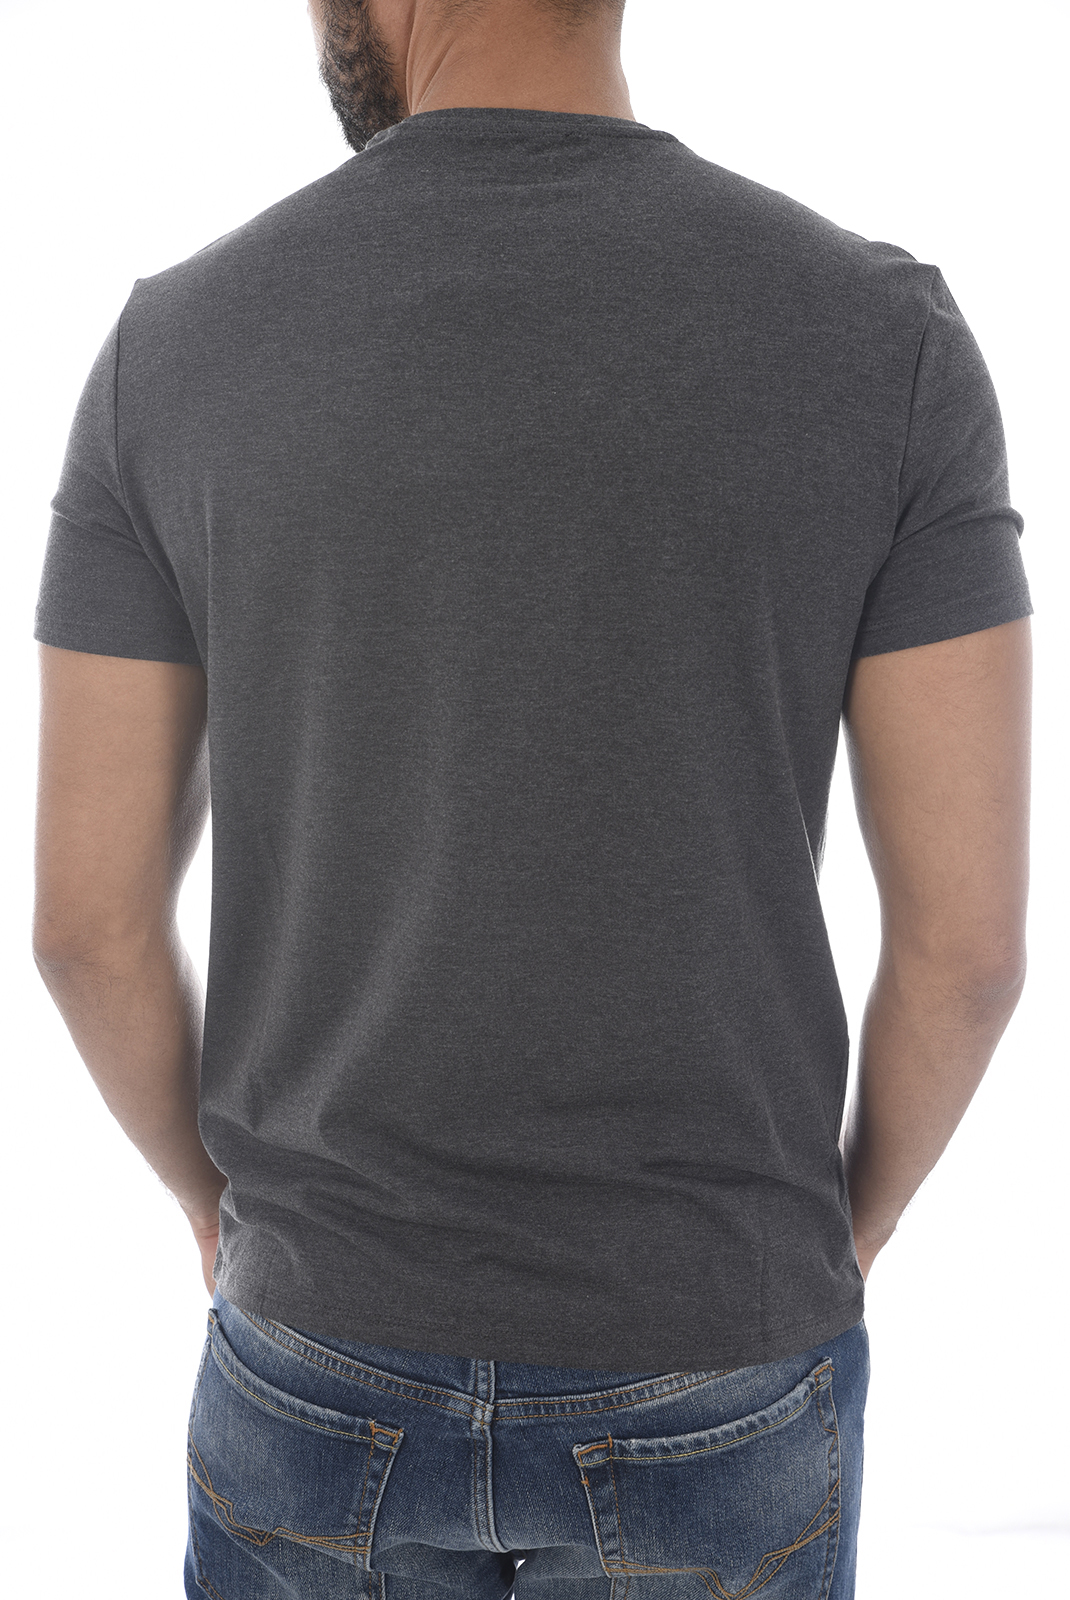 Tee-shirt gris stretch homme Guess - M83i17